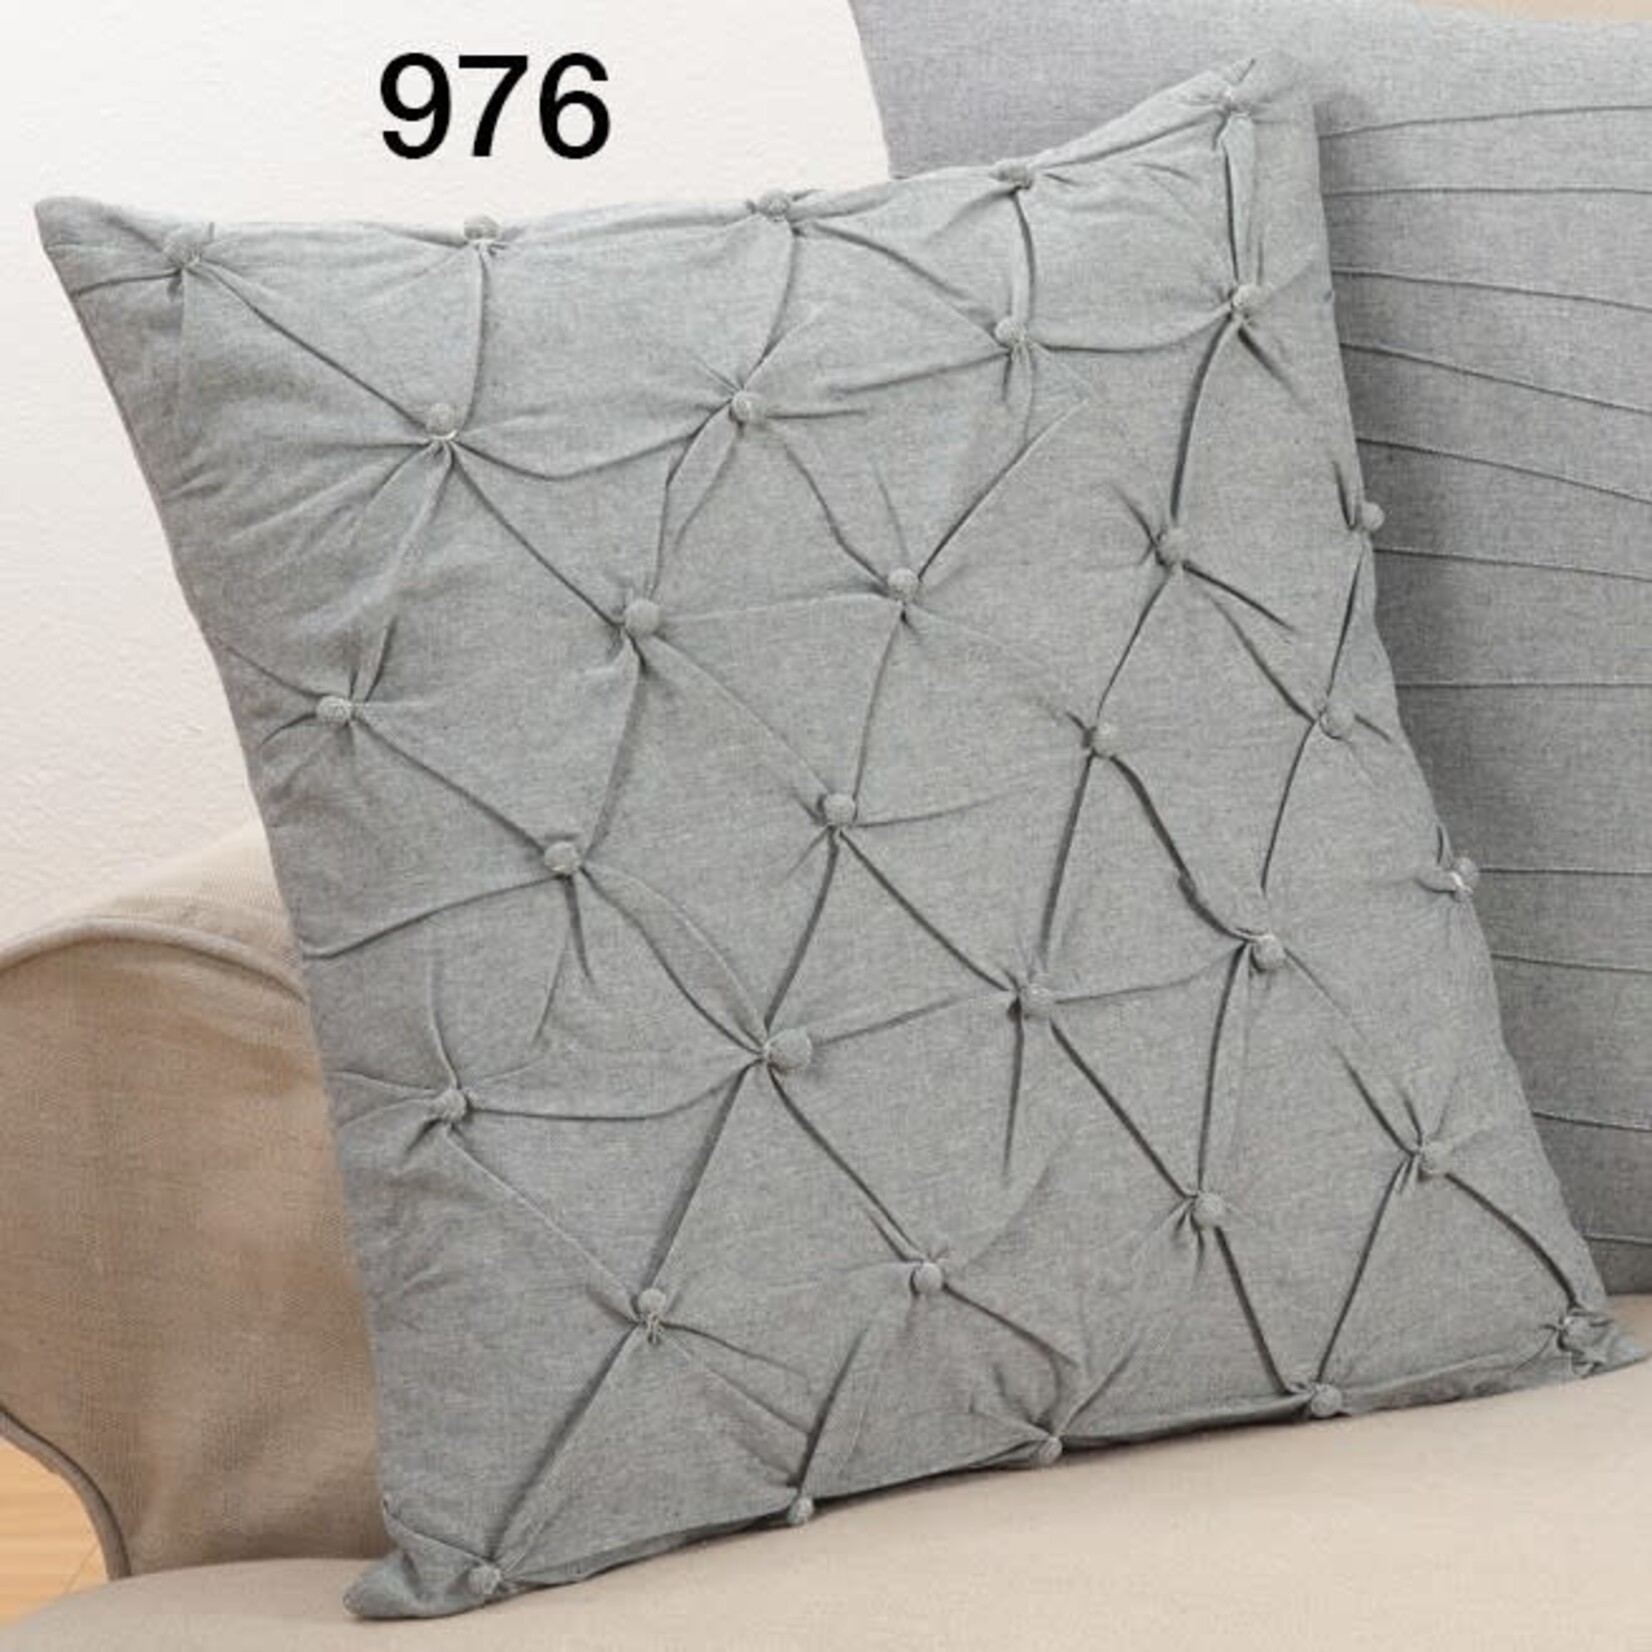 Saro 976.GY18S Pintuck Pillow 18" Square Down Filled Grey